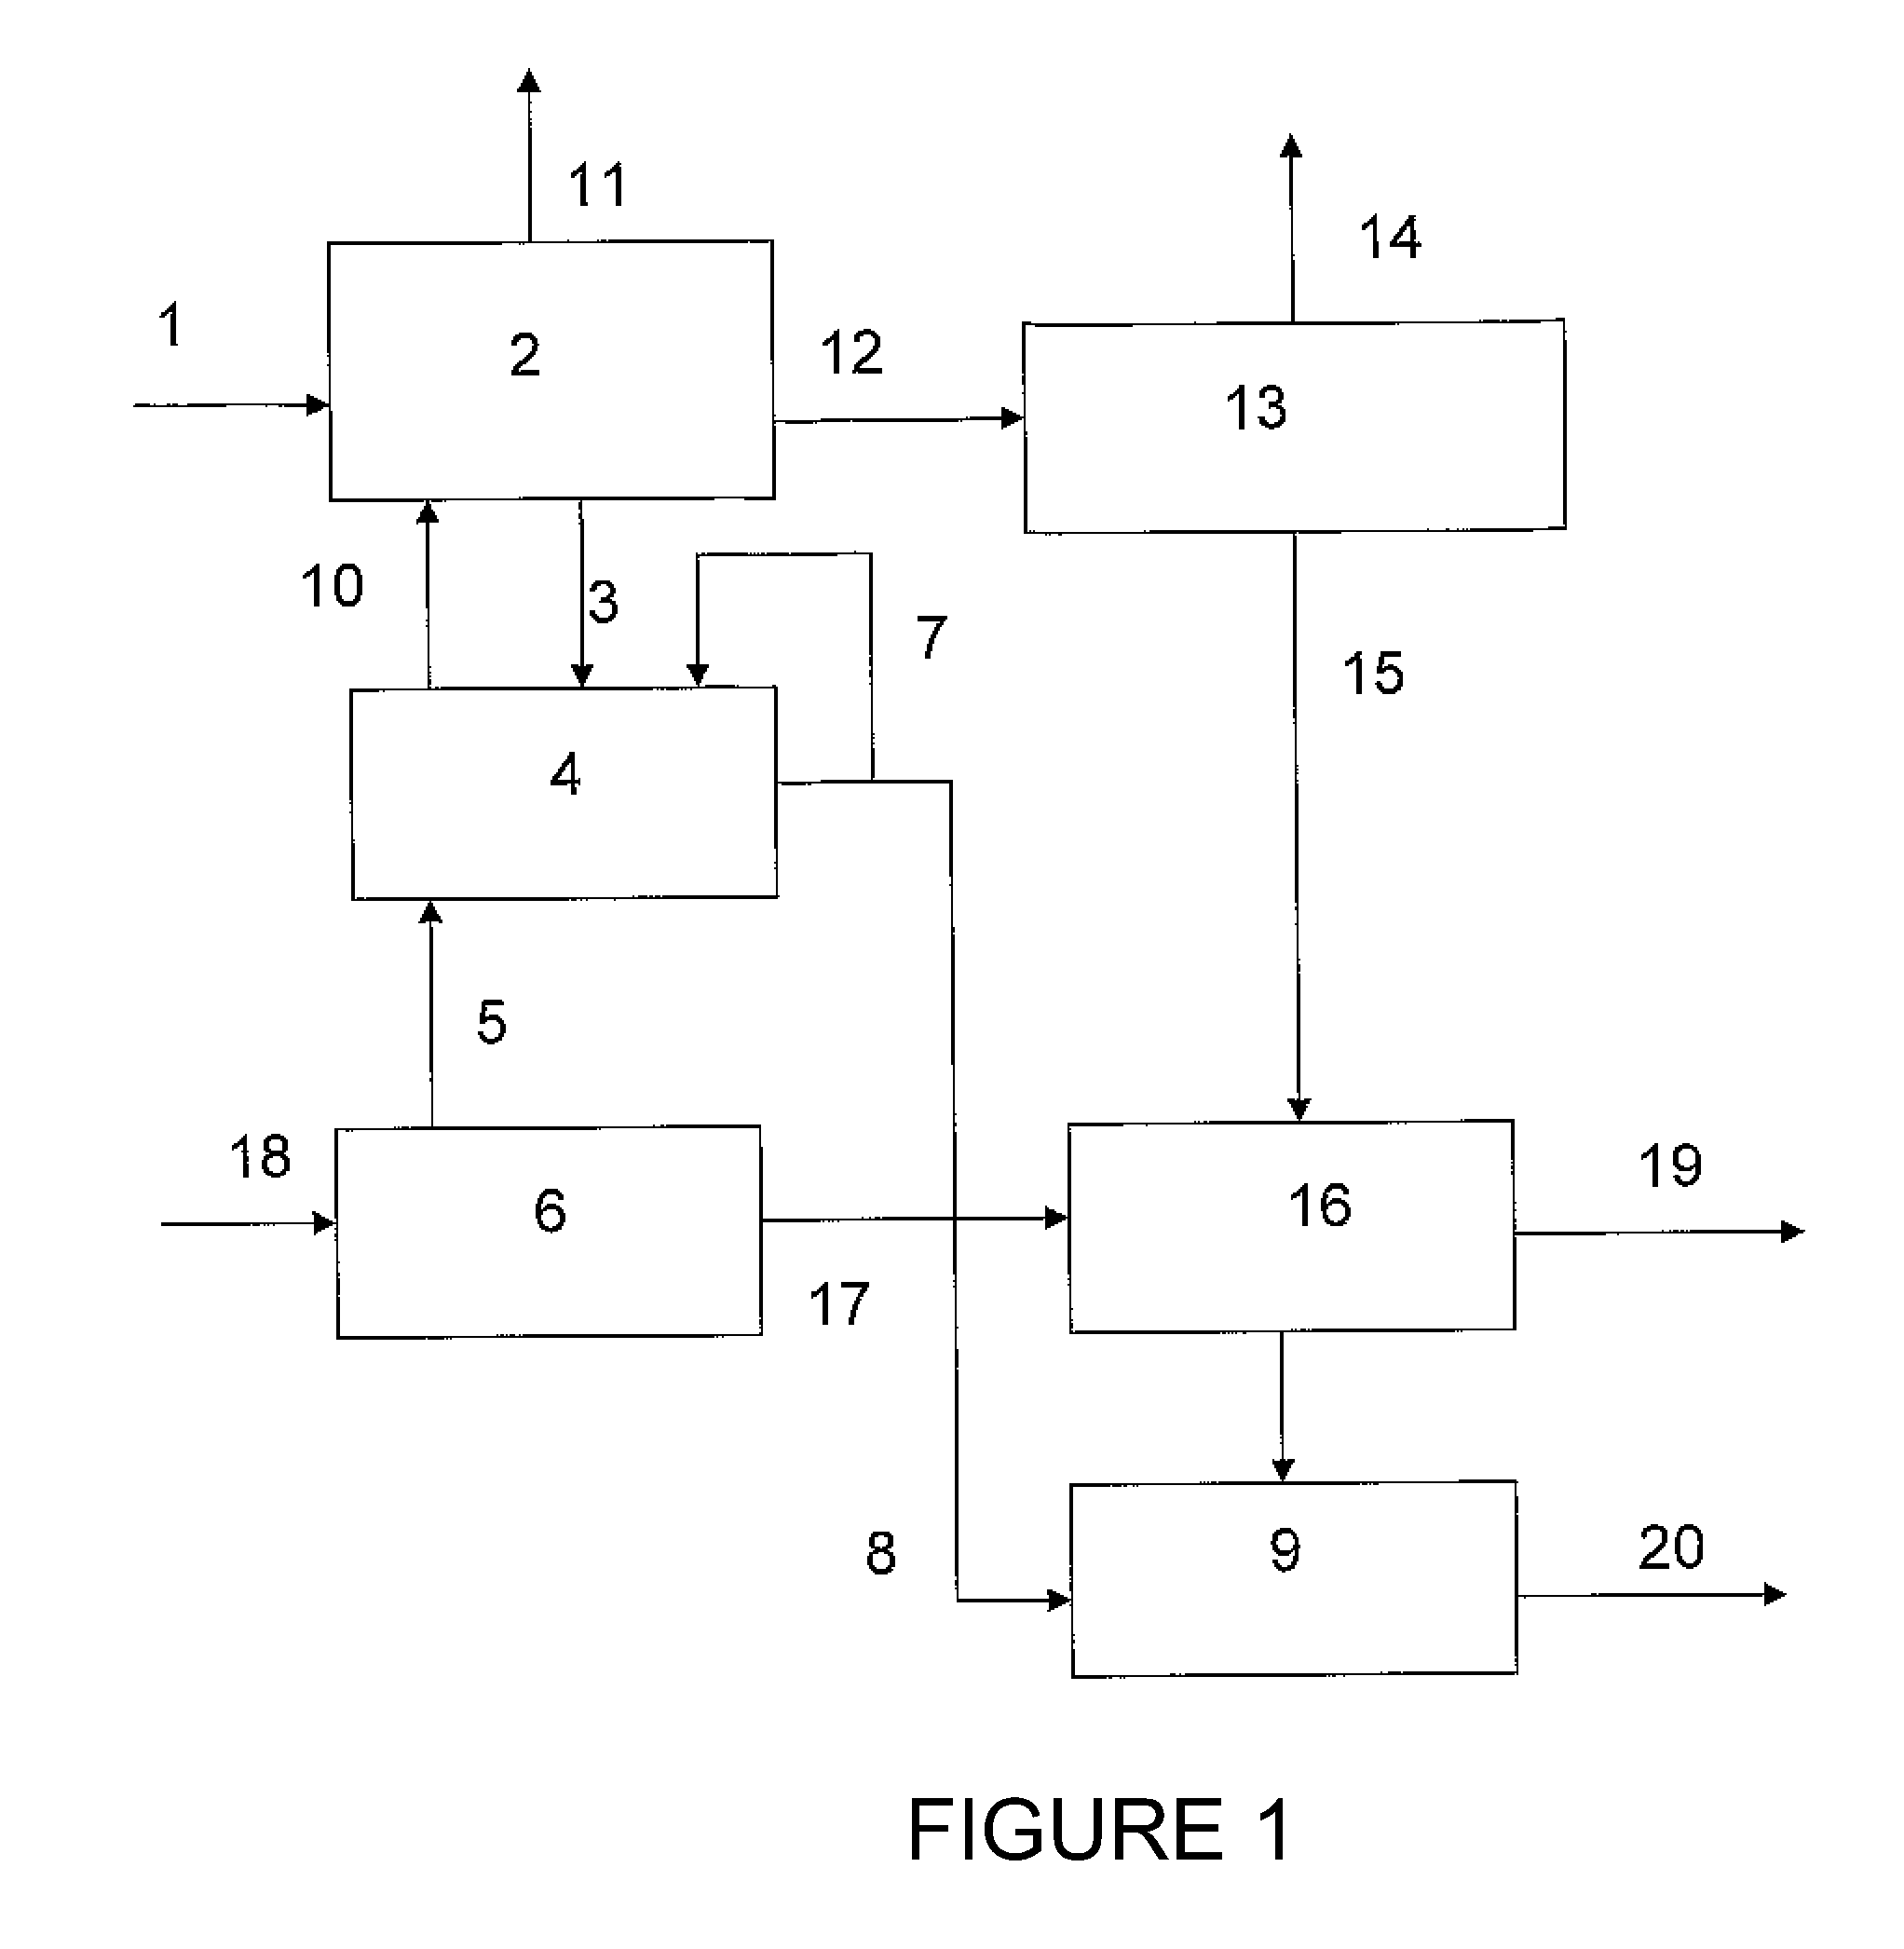 Integrated process for the manufacture of olefins and intermediates for the productions of ammonia and urea